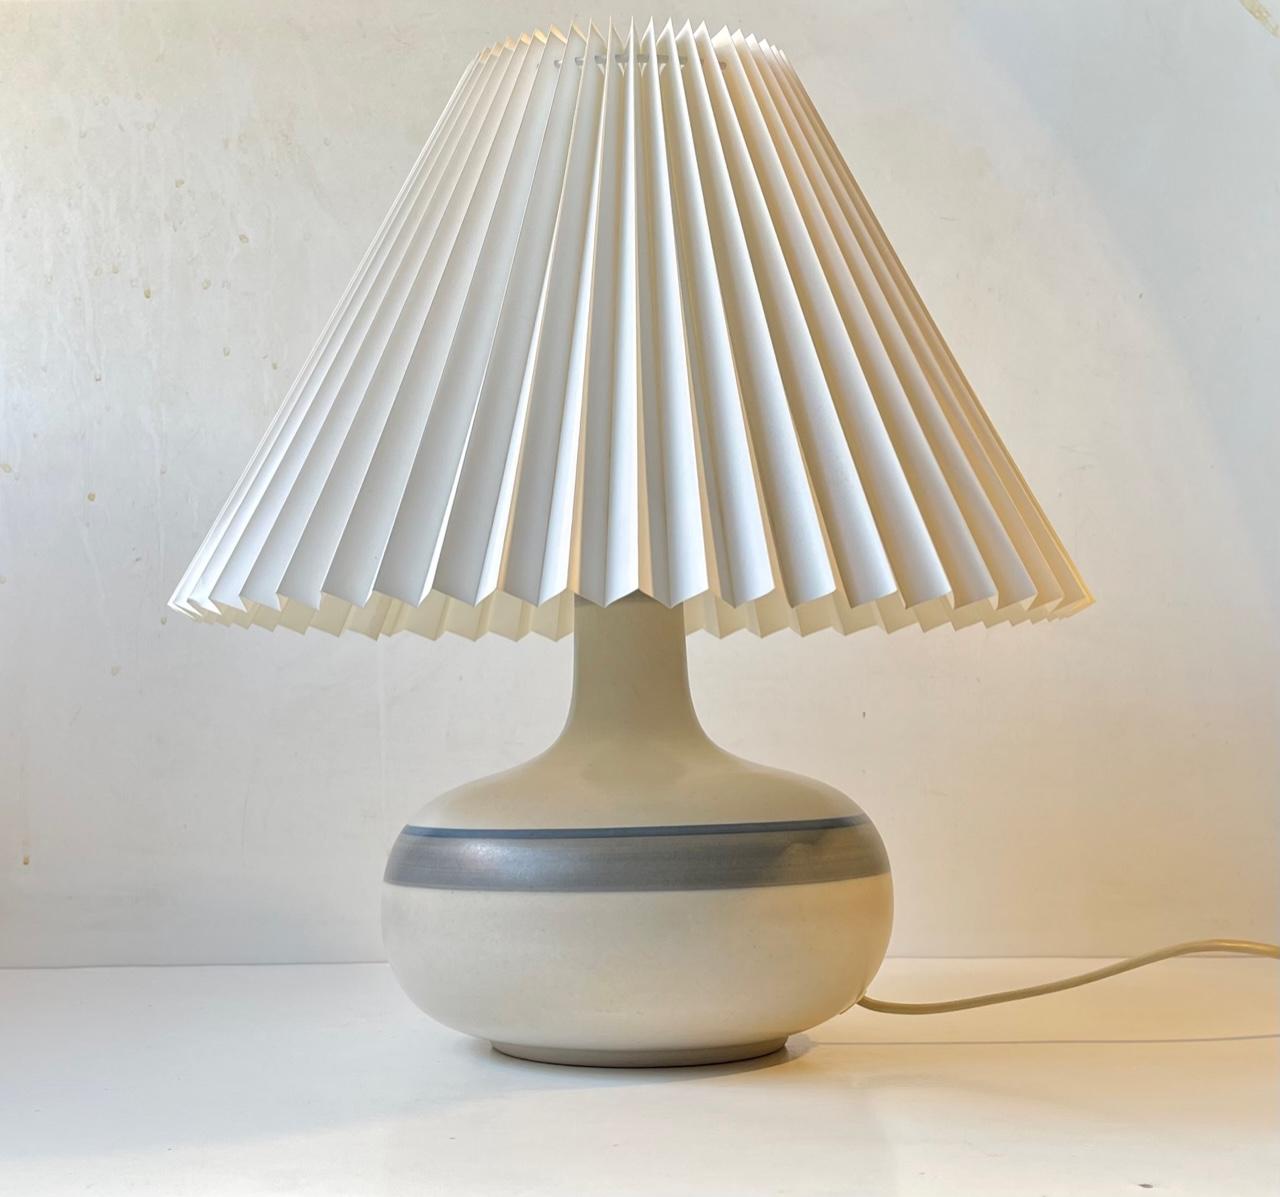 Stoneware Table Light decorated with grey and blue stripes on a pastel main-glaze. Made at Axella Design in Denmark during the 1970s. It was probably designed by either Jette Hellerøe or Tue Poulsen who worked at the studio during this time.